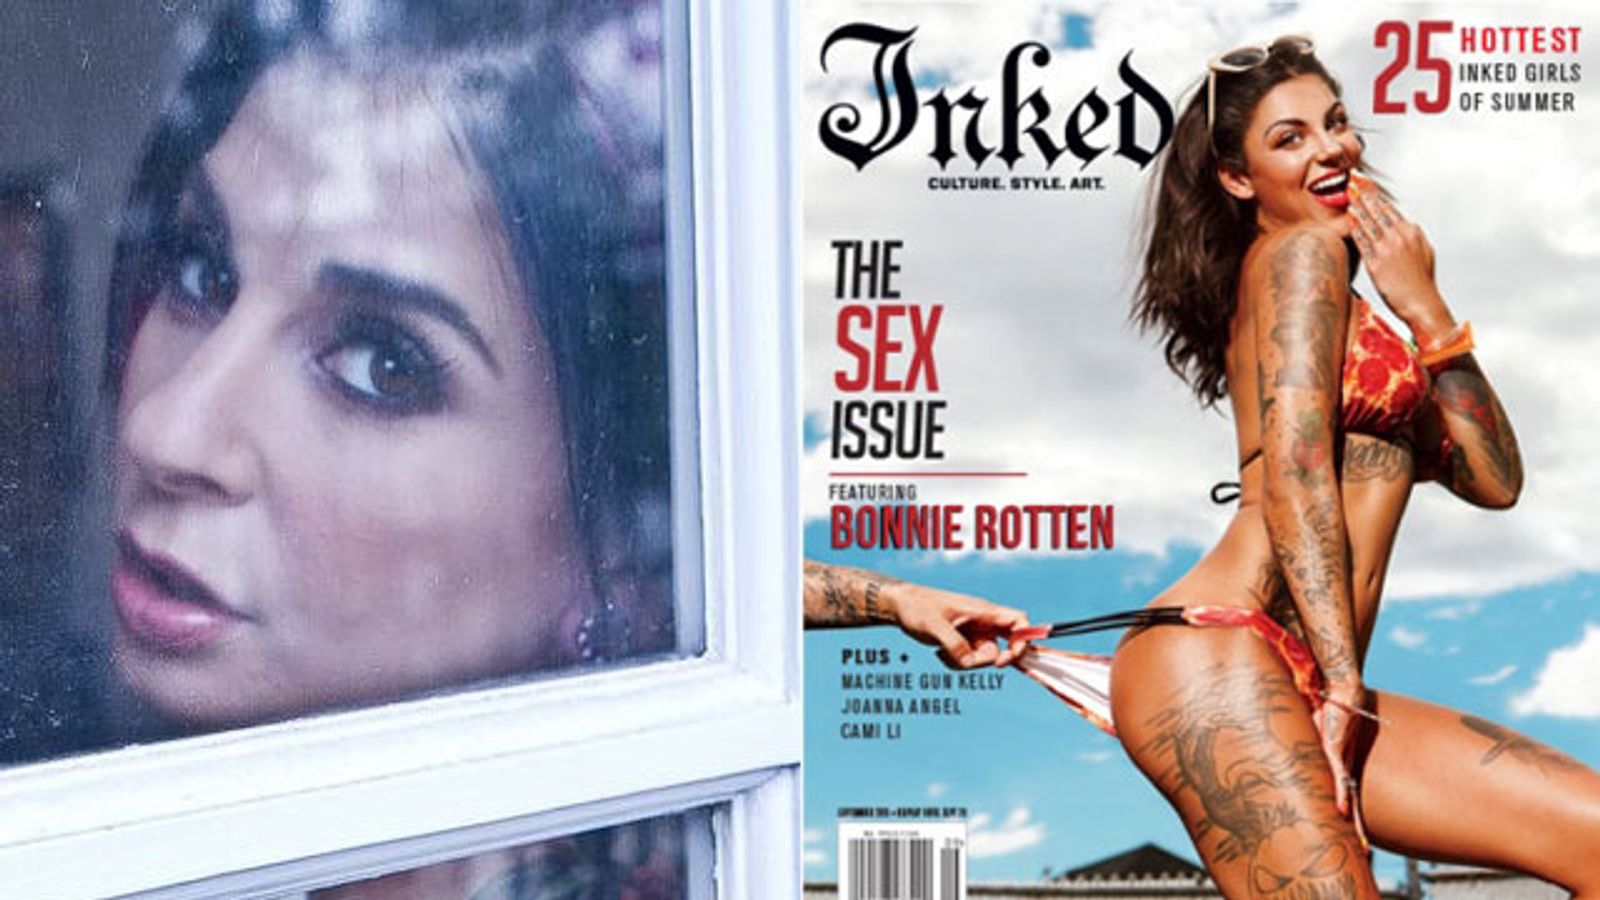 Bonnie Rotten, Joanna Angel Featured in 'Inked' Sex Issue